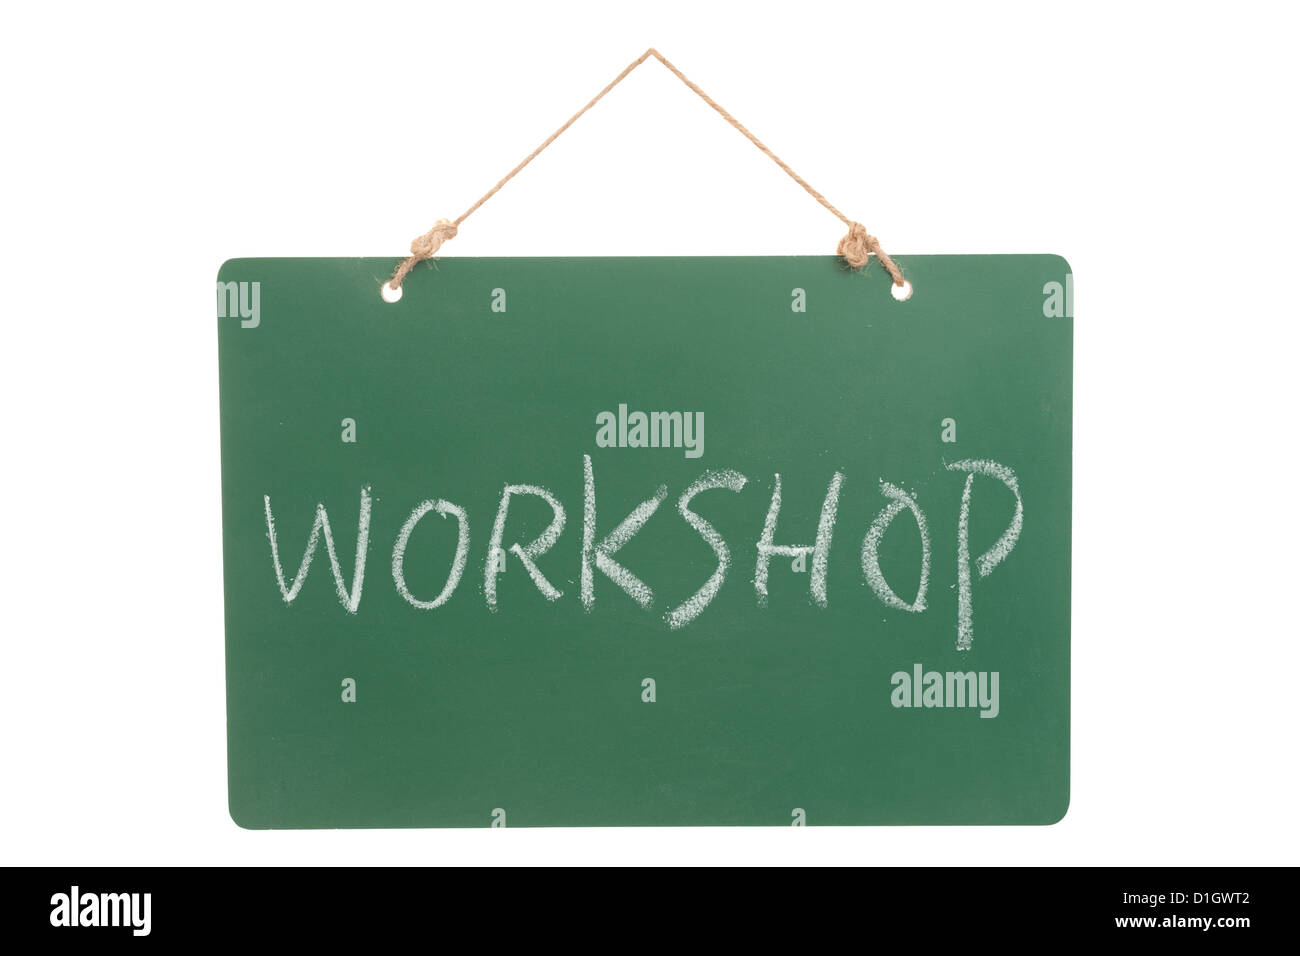 Workshop word on green board hanging by a rope Stock Photo